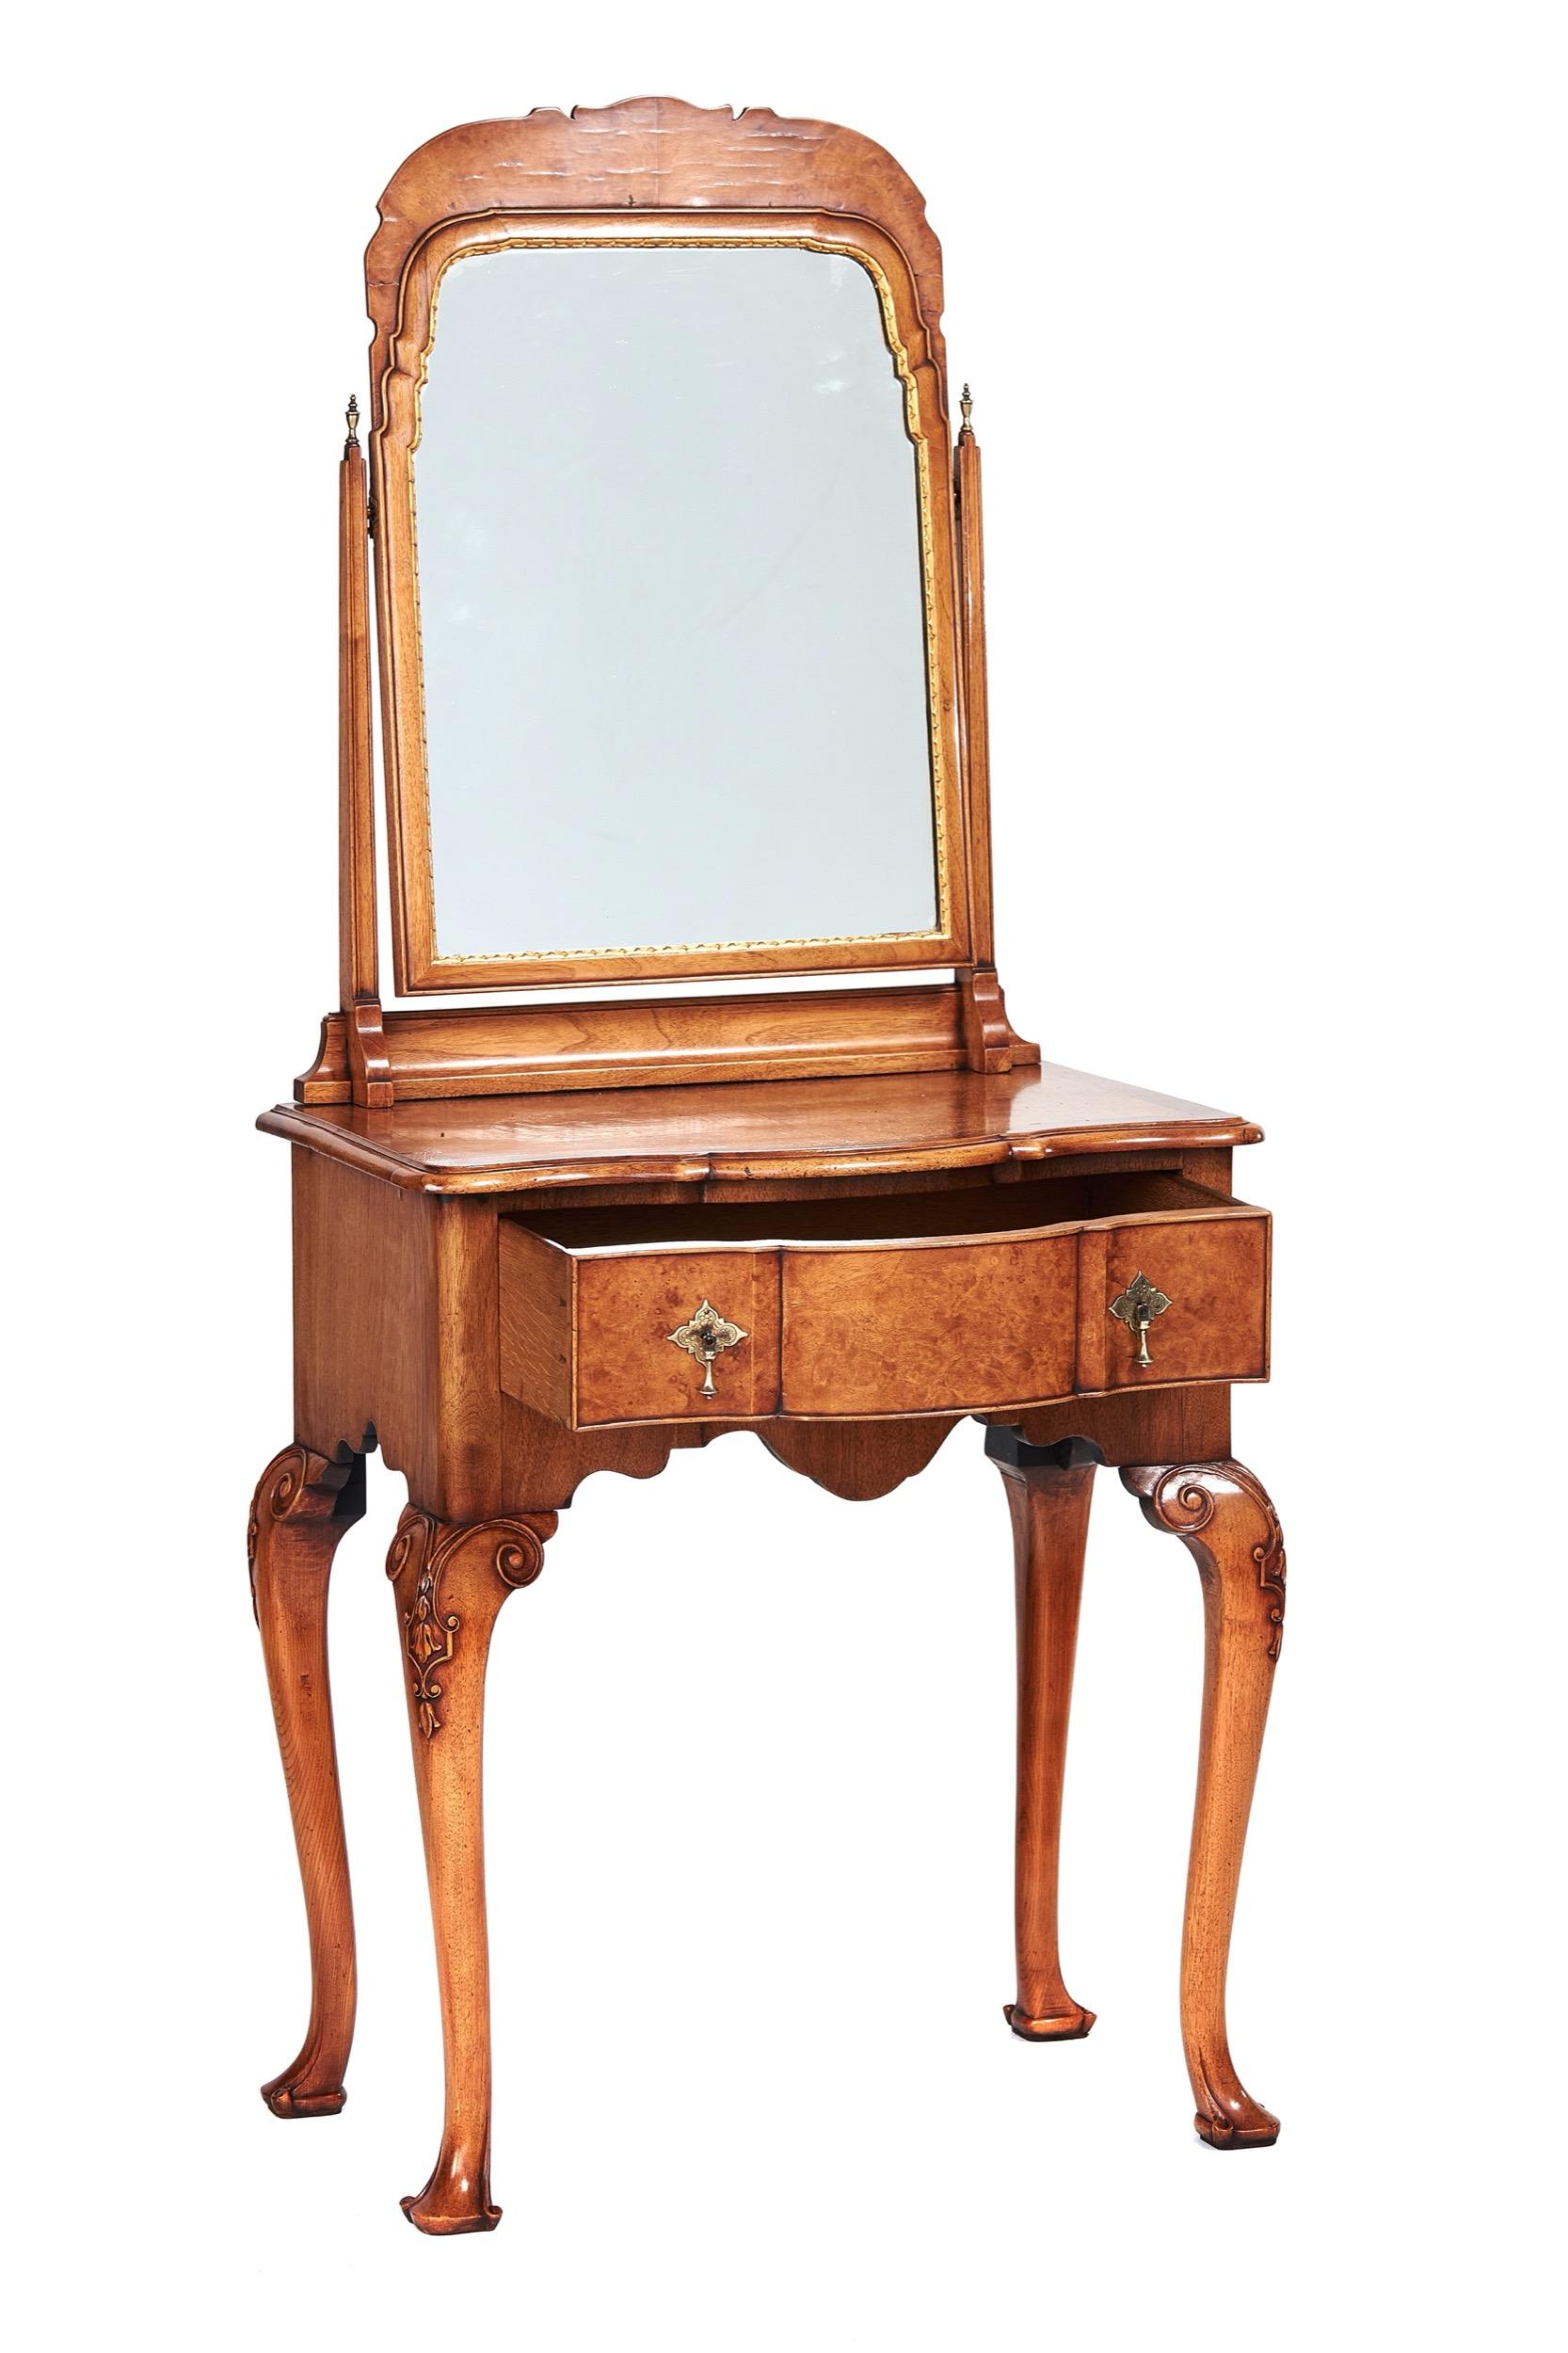 Fine Walnut & Burr Walnut  Lowboy  Dressing table,
 Queen Anne Revival circa 1920s
Arch Shaped Swing mirror, Swivels on ball with pinch screws.
Tapering Supports each side with urn shaped Brass Finials, 
Mirror with Gilt carved moulding around